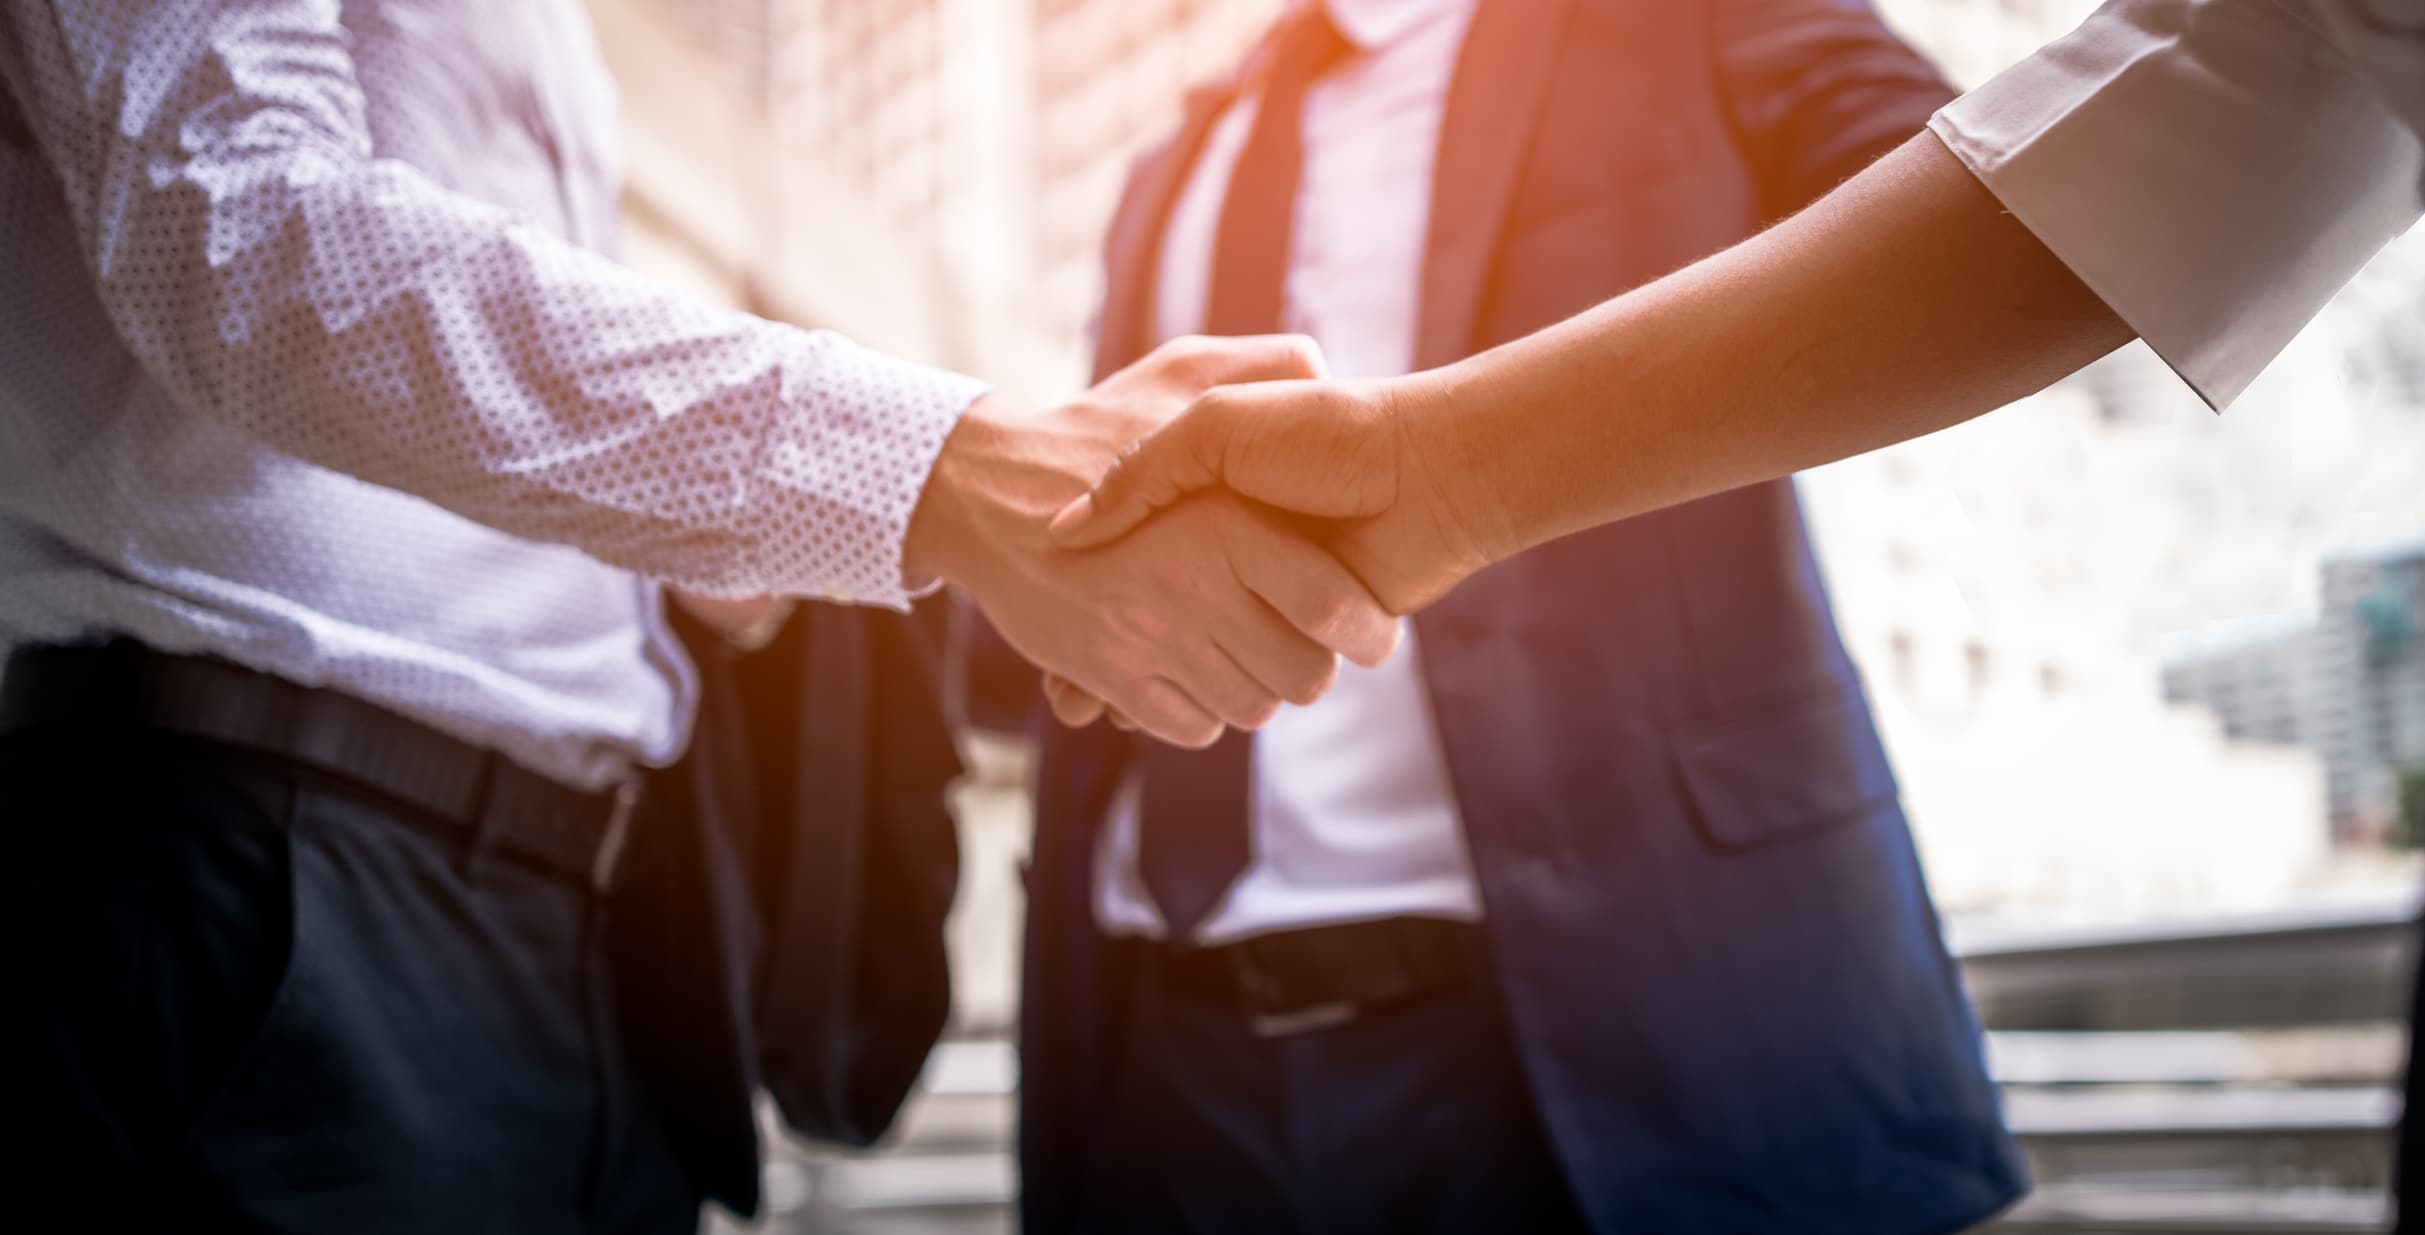 Healthcare leader shaking hands with consultant to begin work on an organization’s brand